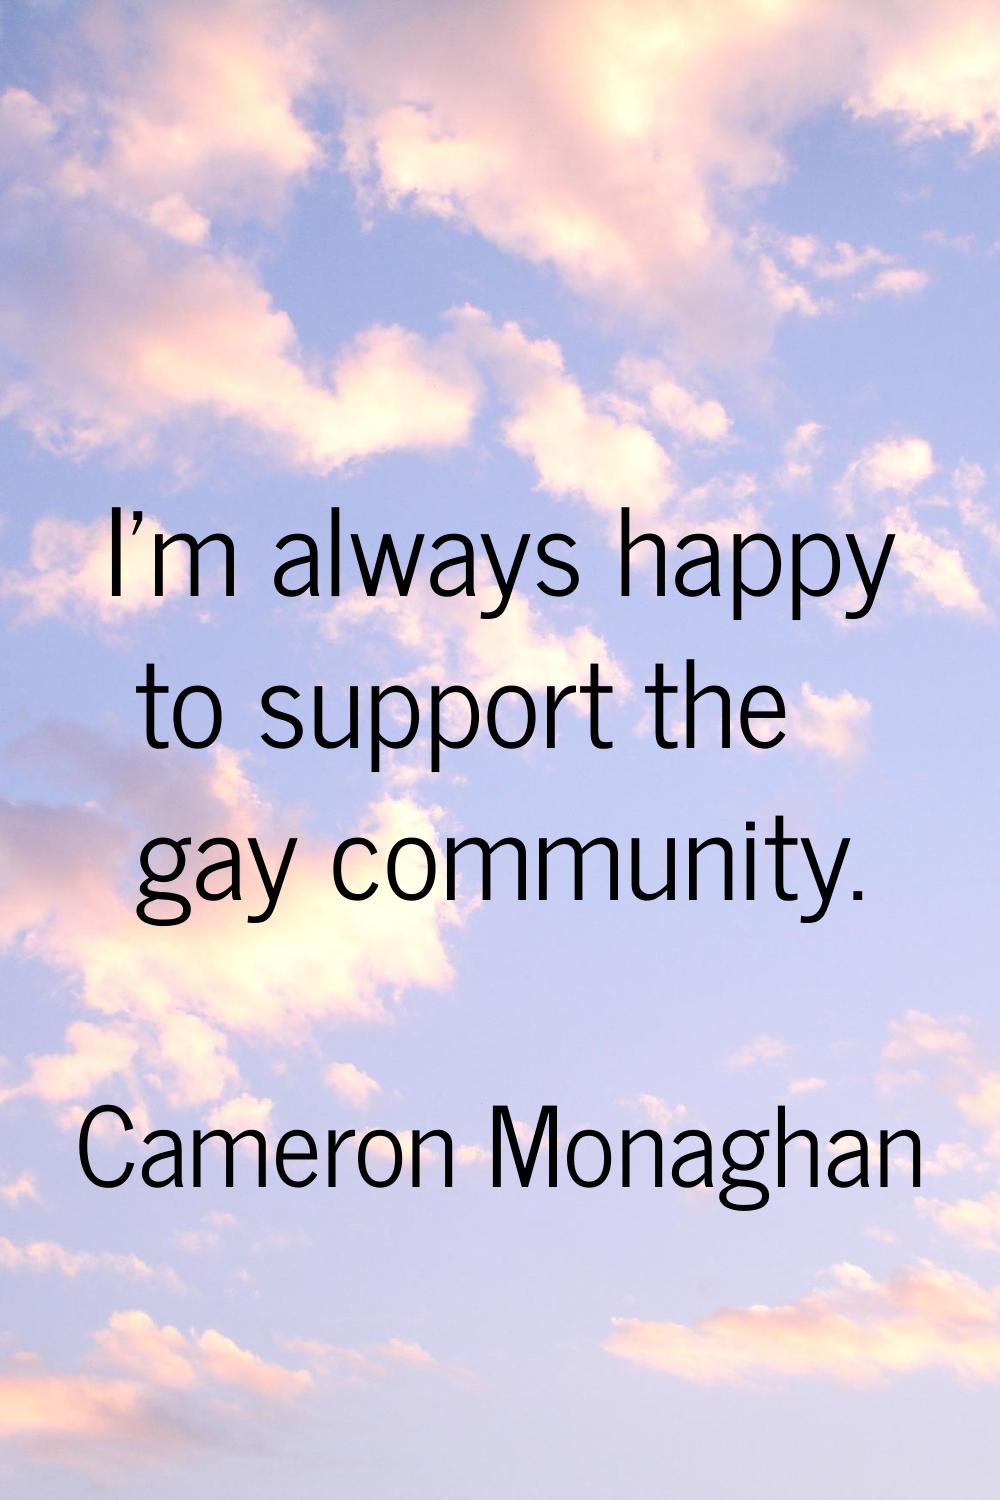 I'm always happy to support the gay community.